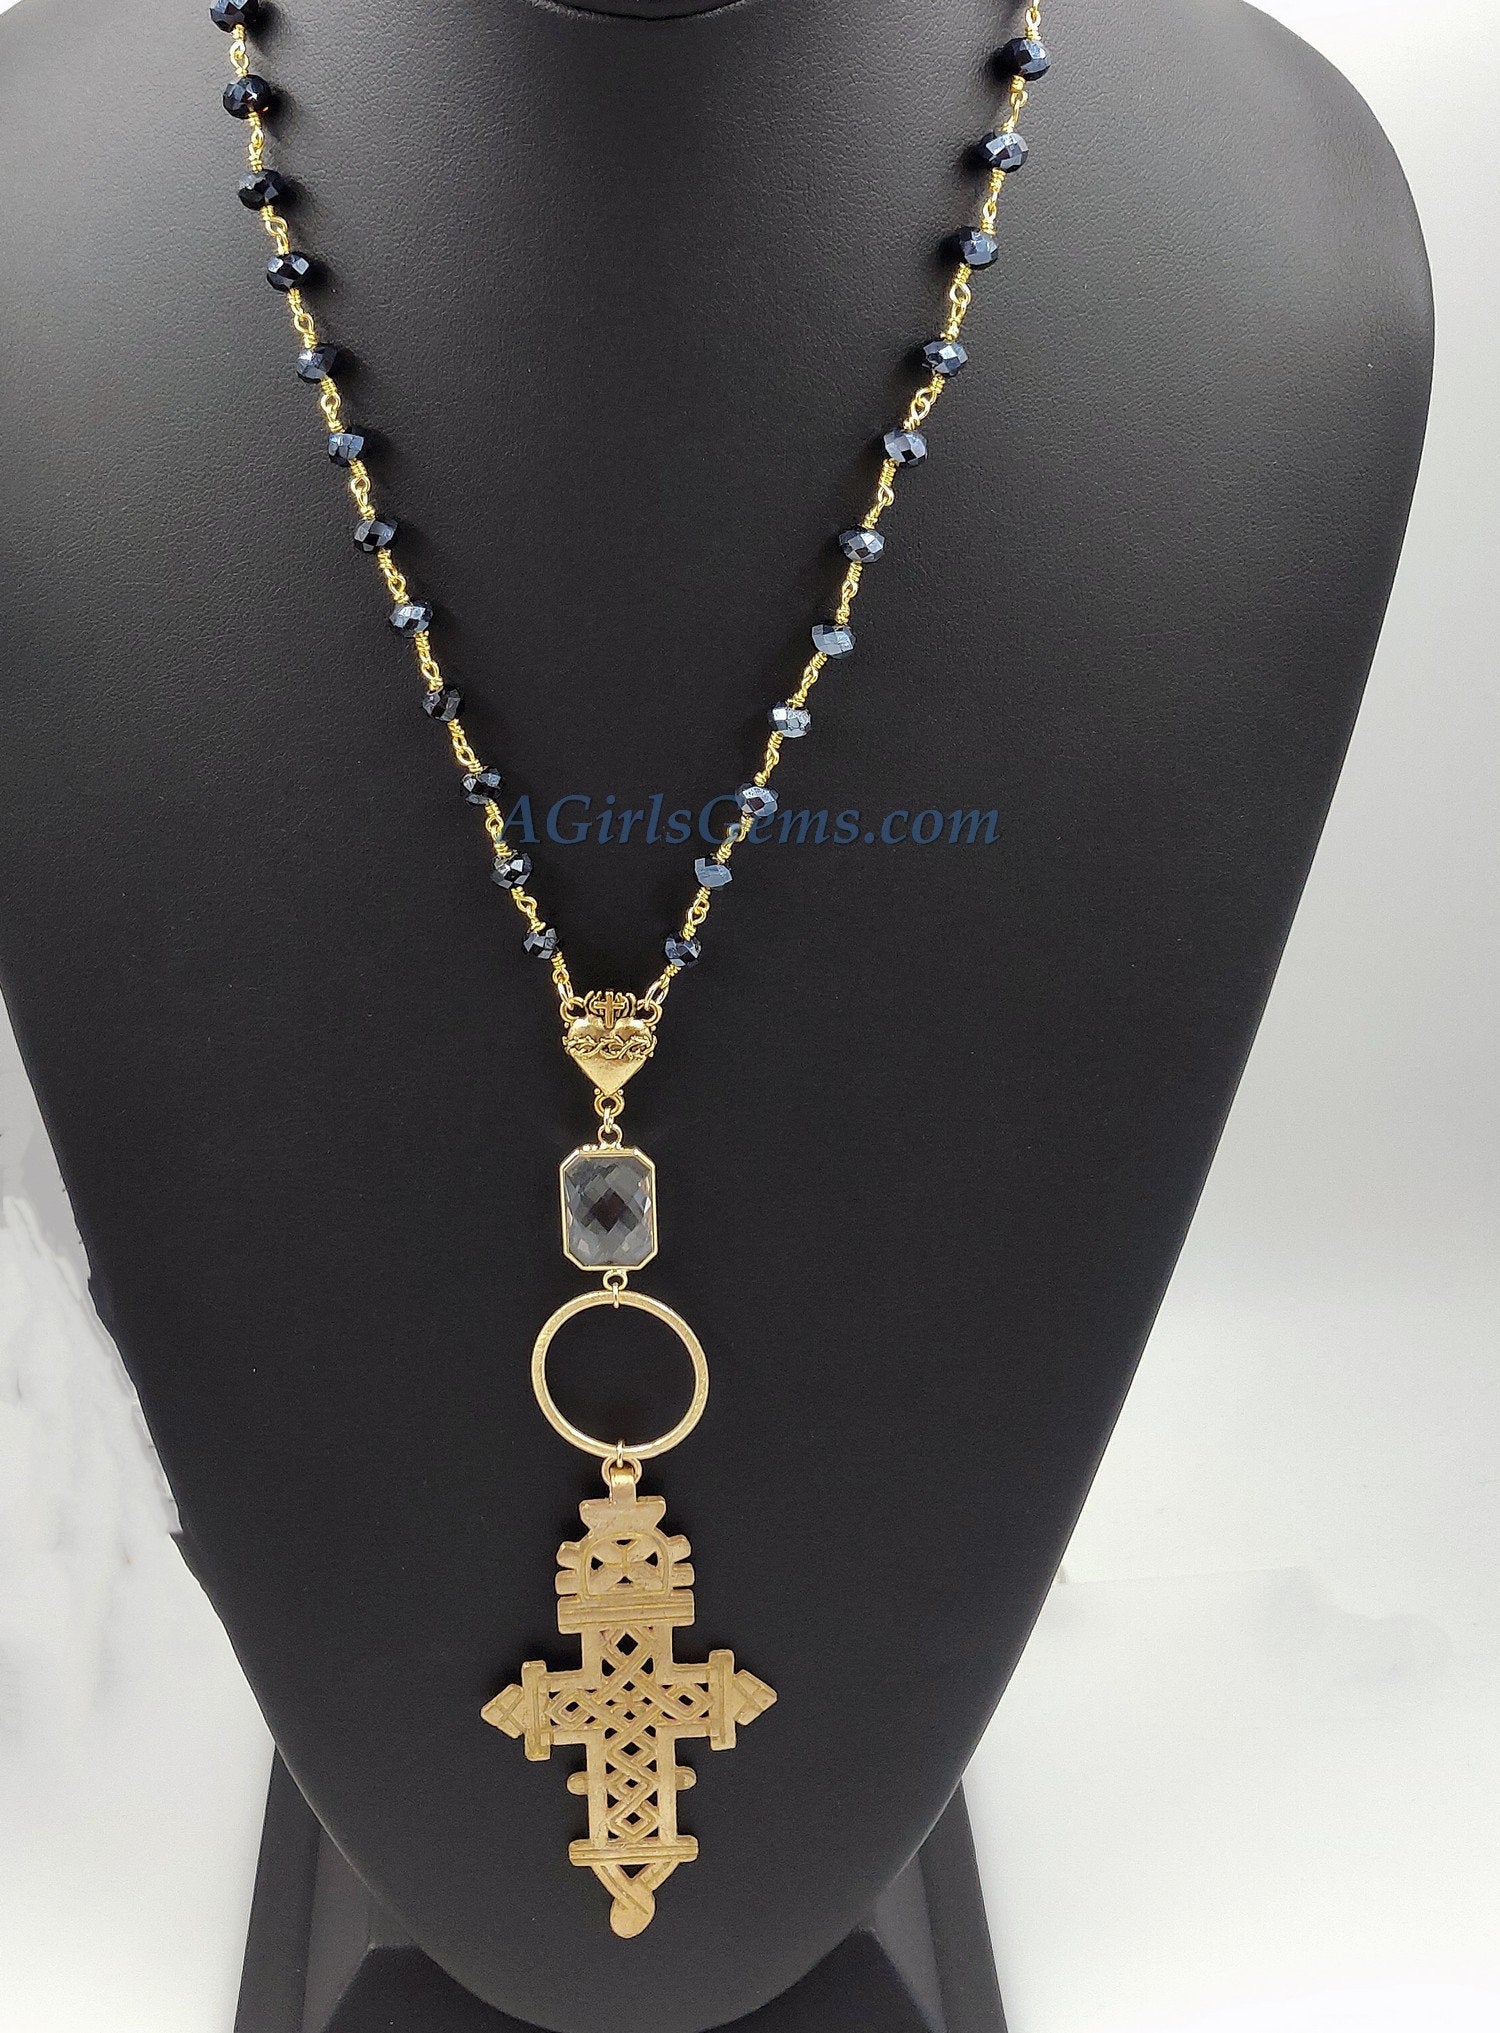 Long Black Rosary Beaded Brass Gold Coptic Cross Necklace - A Girls Gems